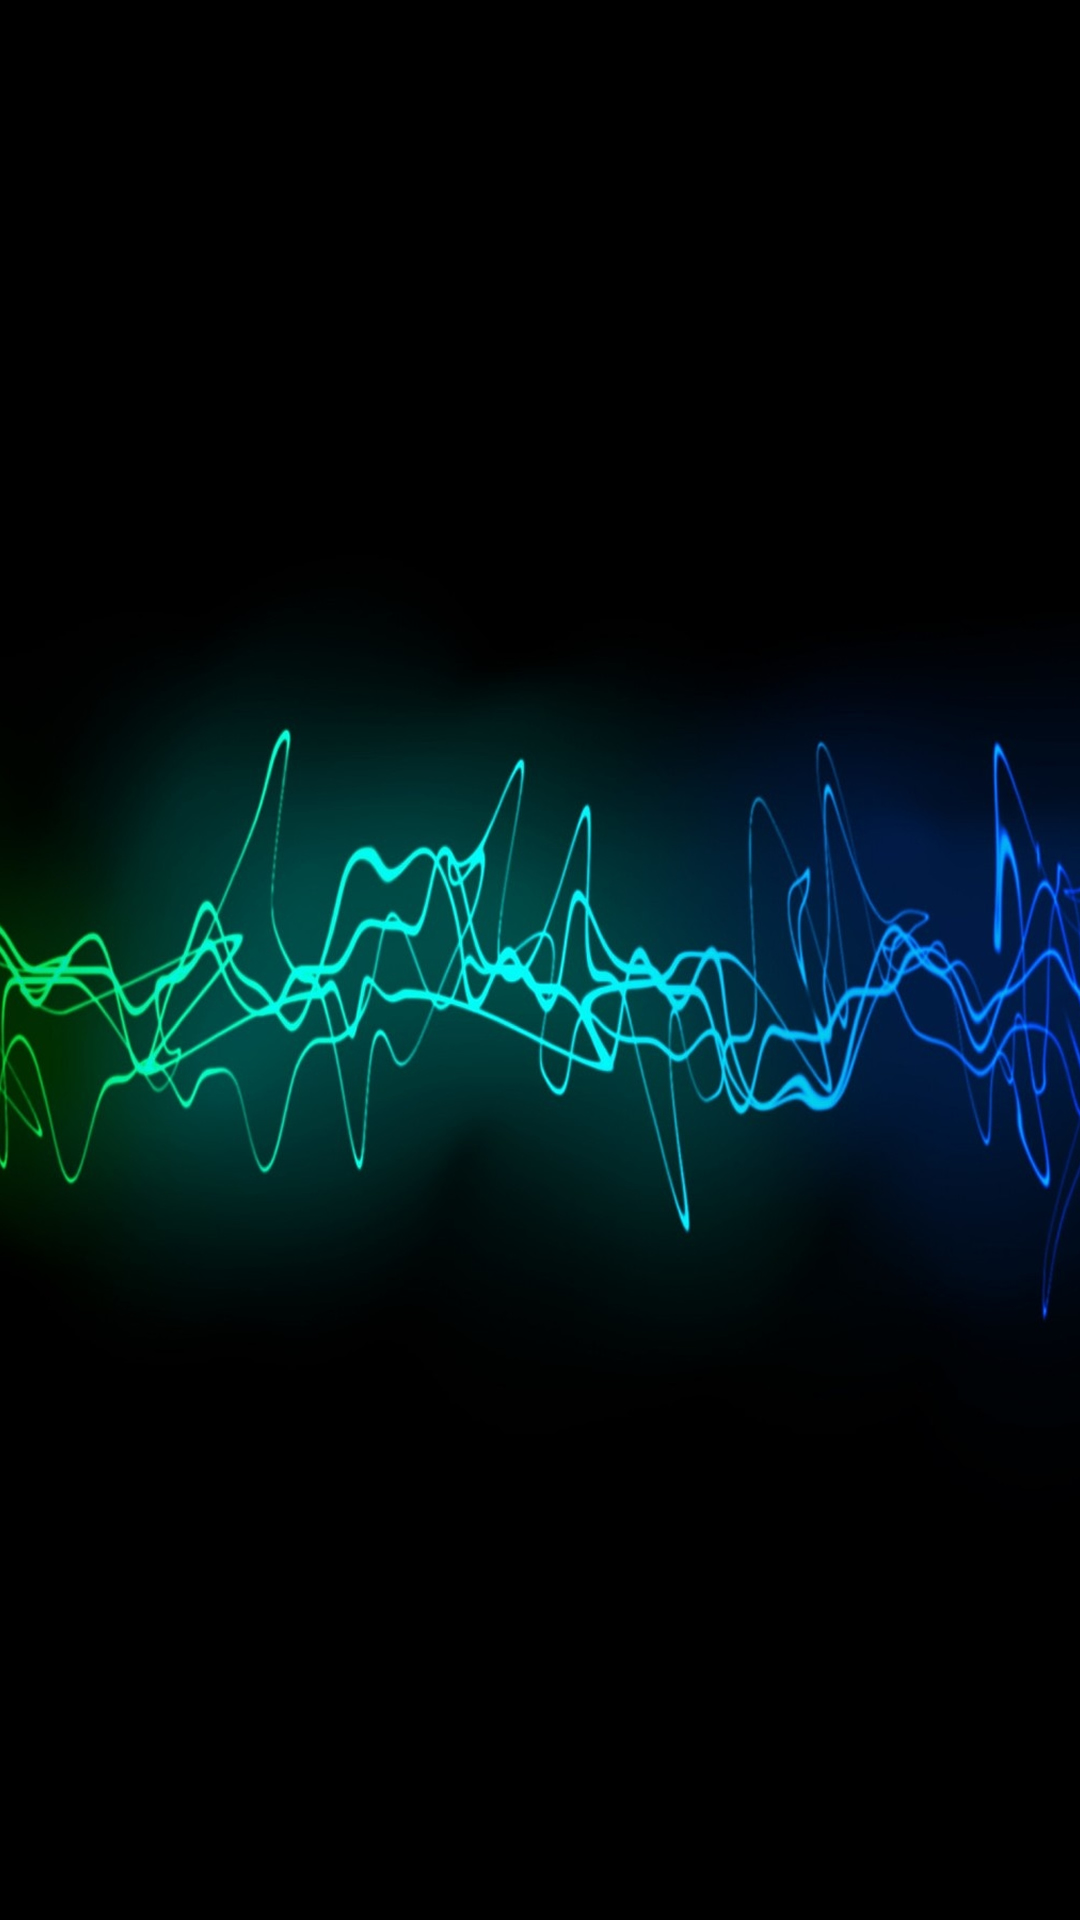 Cool Sound Waves Iphone 6 Wallpaper Download Iphone Wallpapers